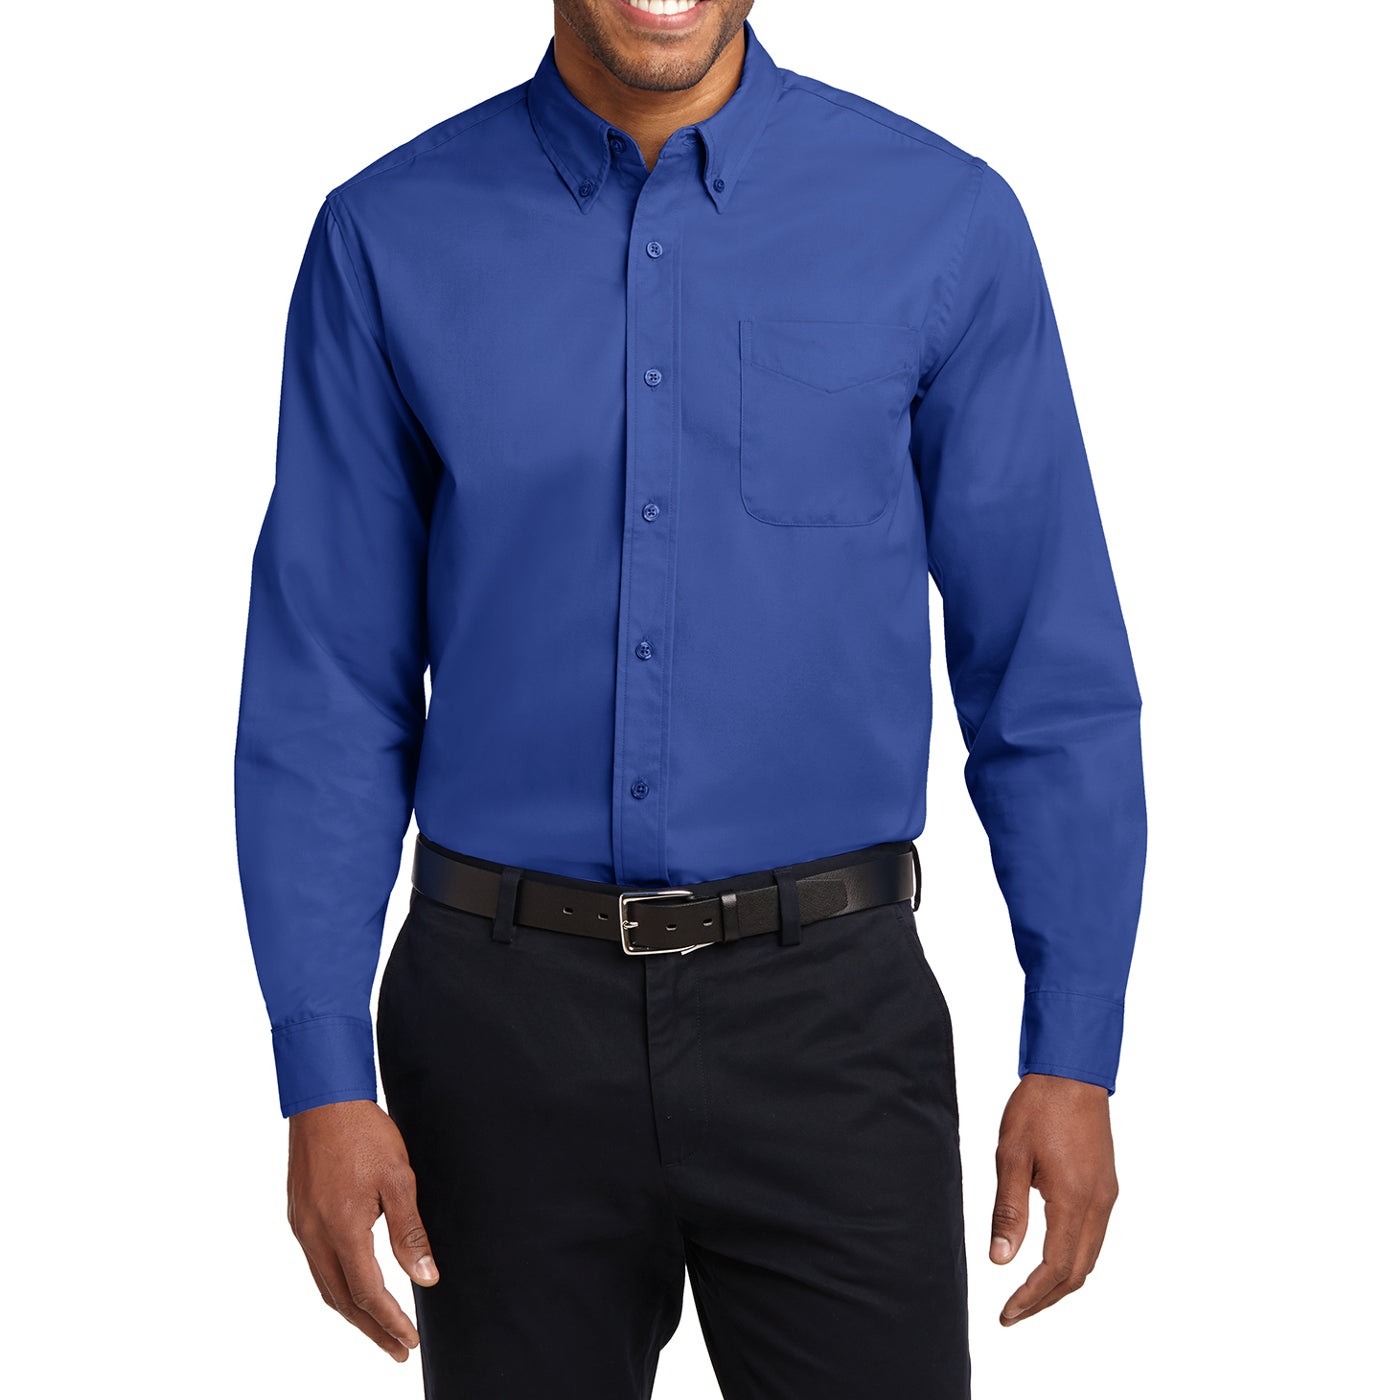 Men's Long Sleeve Easy Care Shirt - Royal/ Classic Navy - Front